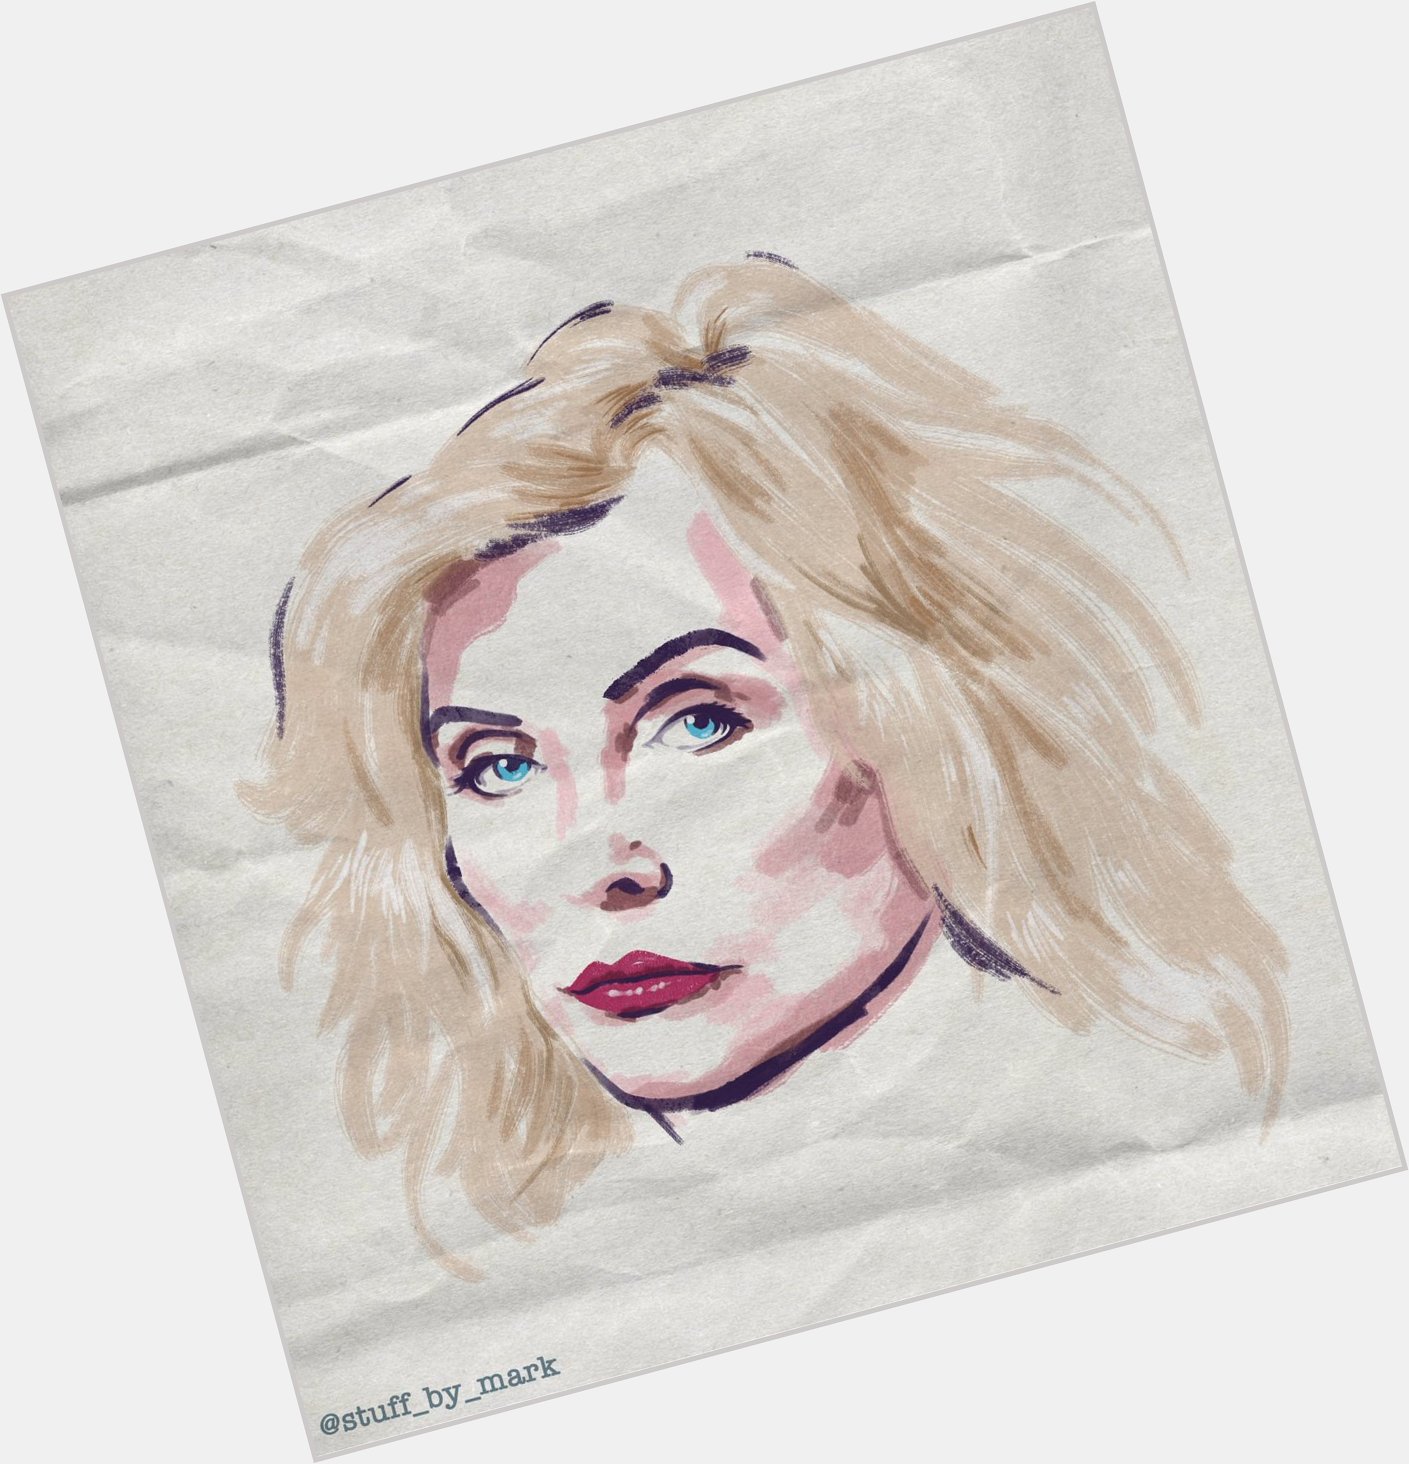 Happy Birthday to her royal highness, Debbie Harry. 